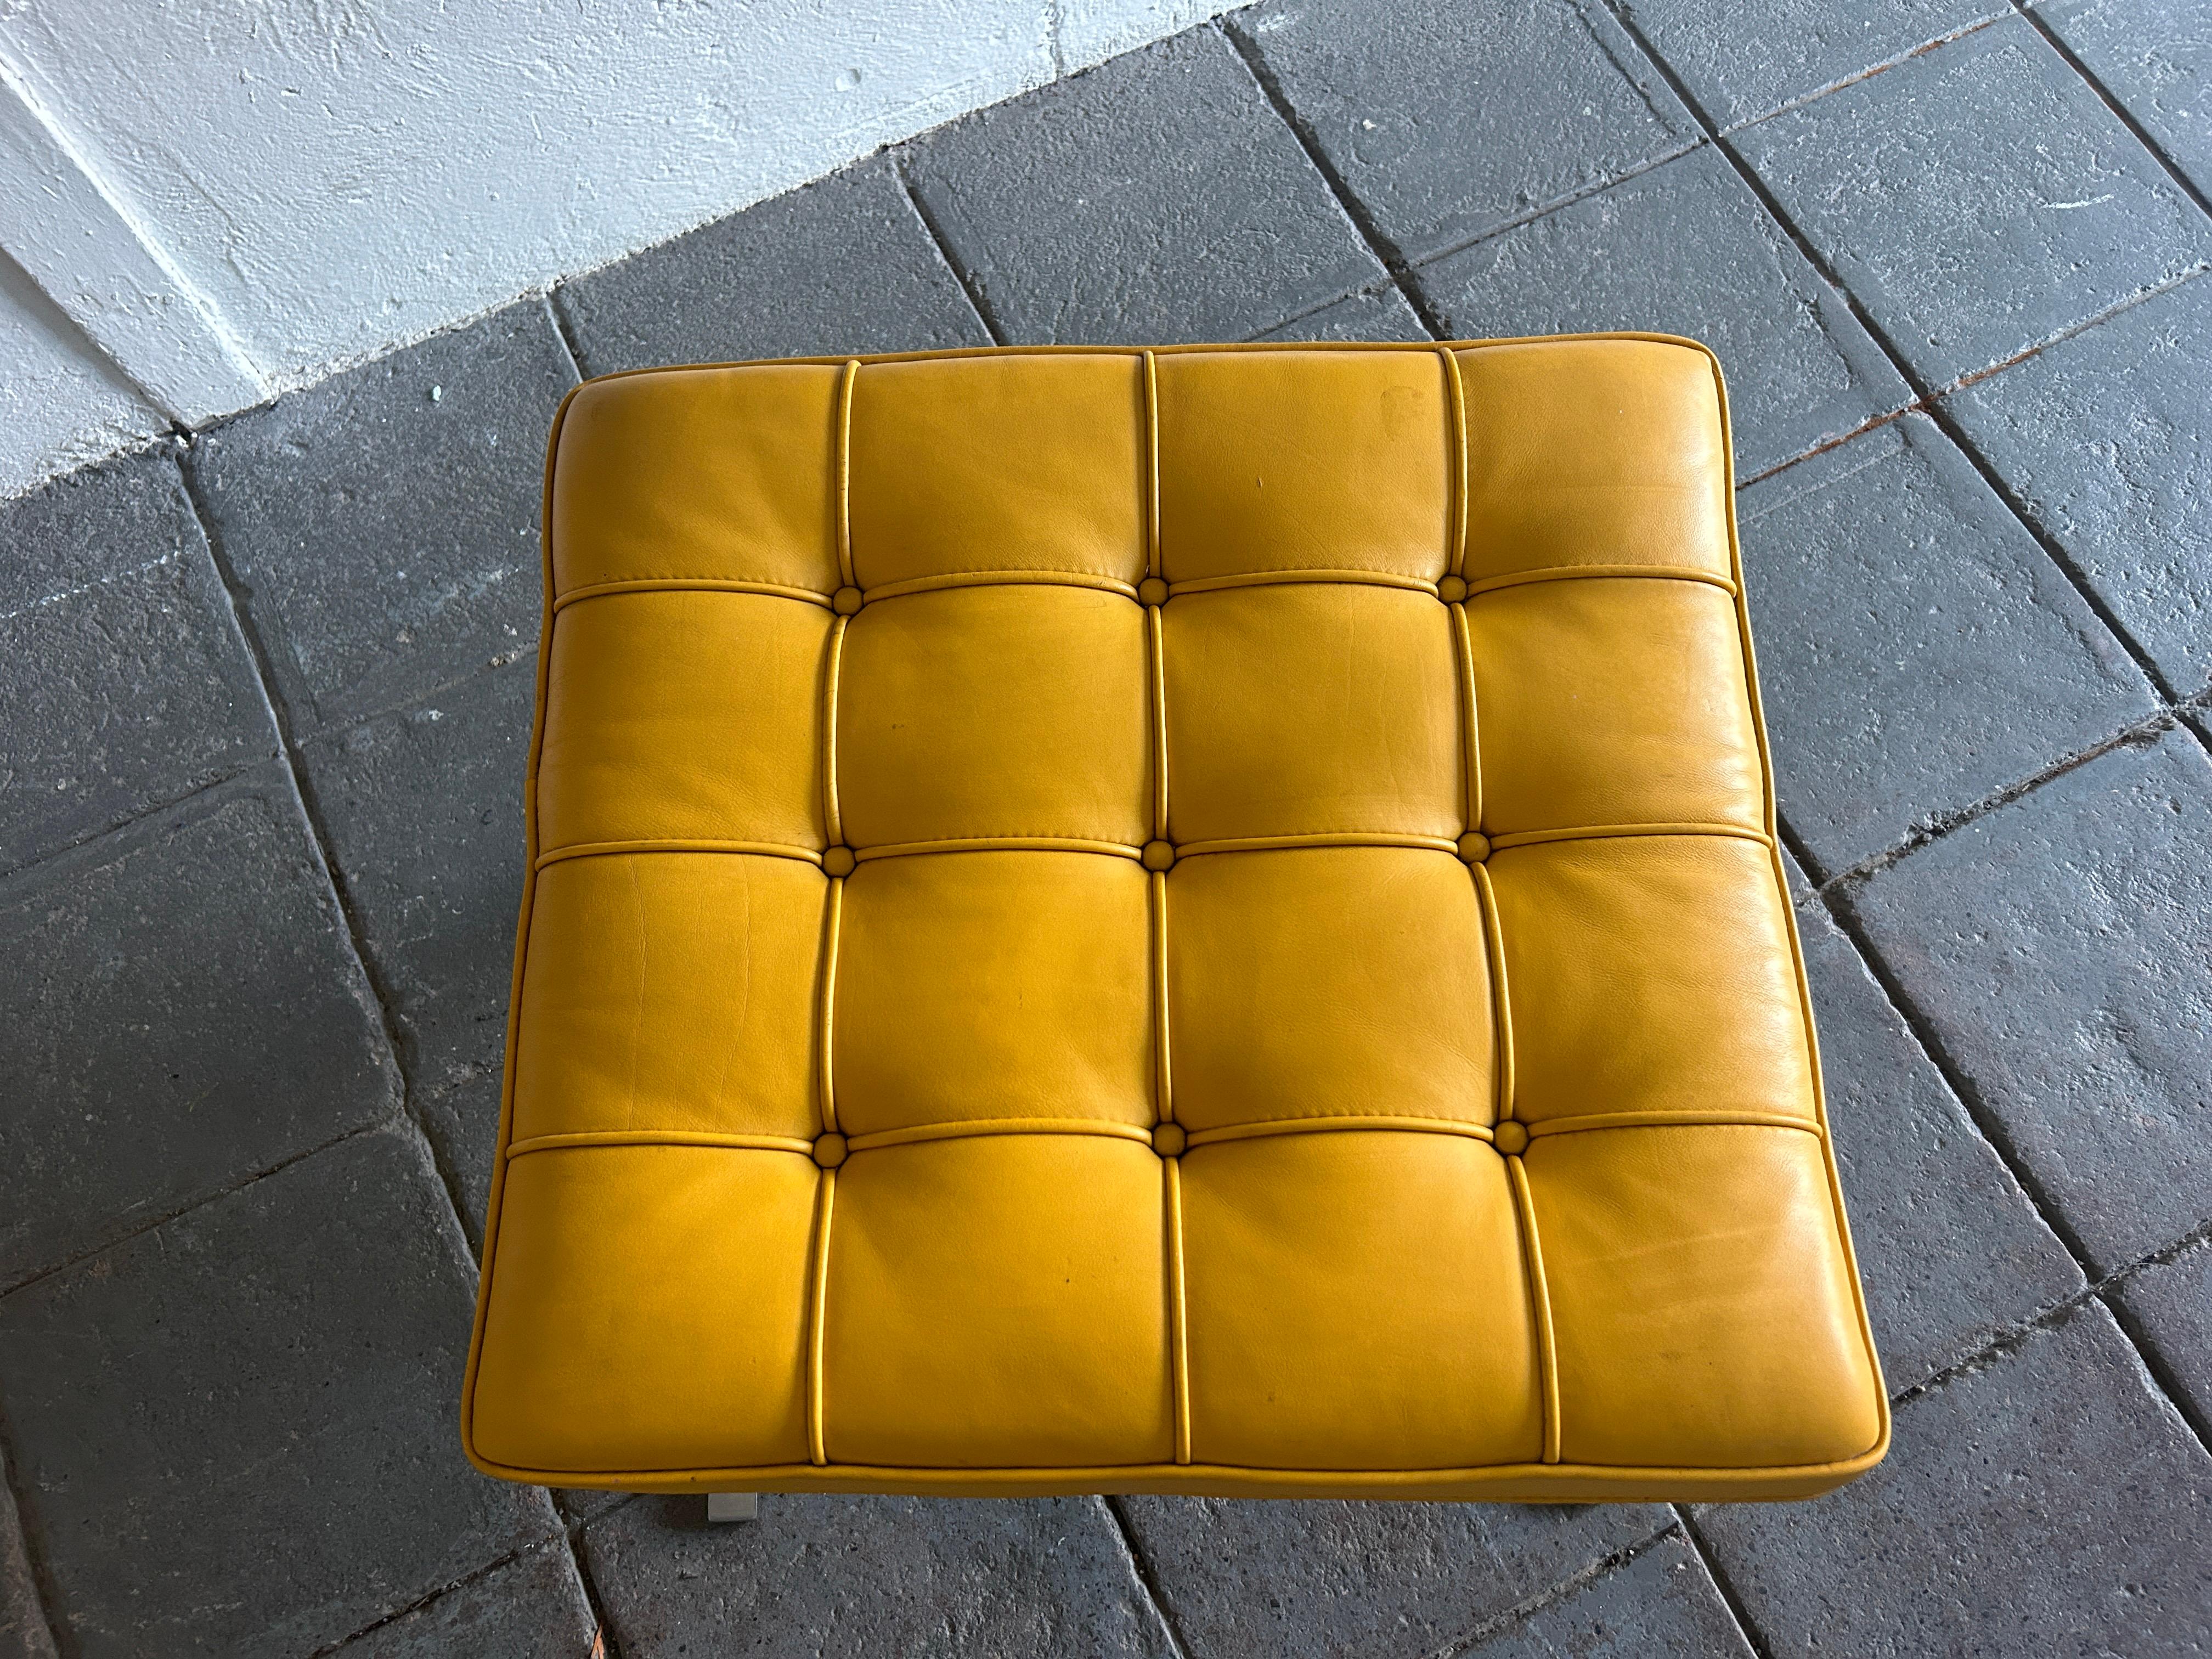 Mid century Ludwig Mies van der Rohe Barcelona ottoman or stool for Knoll studio. The classic design that helped define Mid-Century Modernism. Premium leather in a Rare bright yellow color. As you can see they are in very good condition near